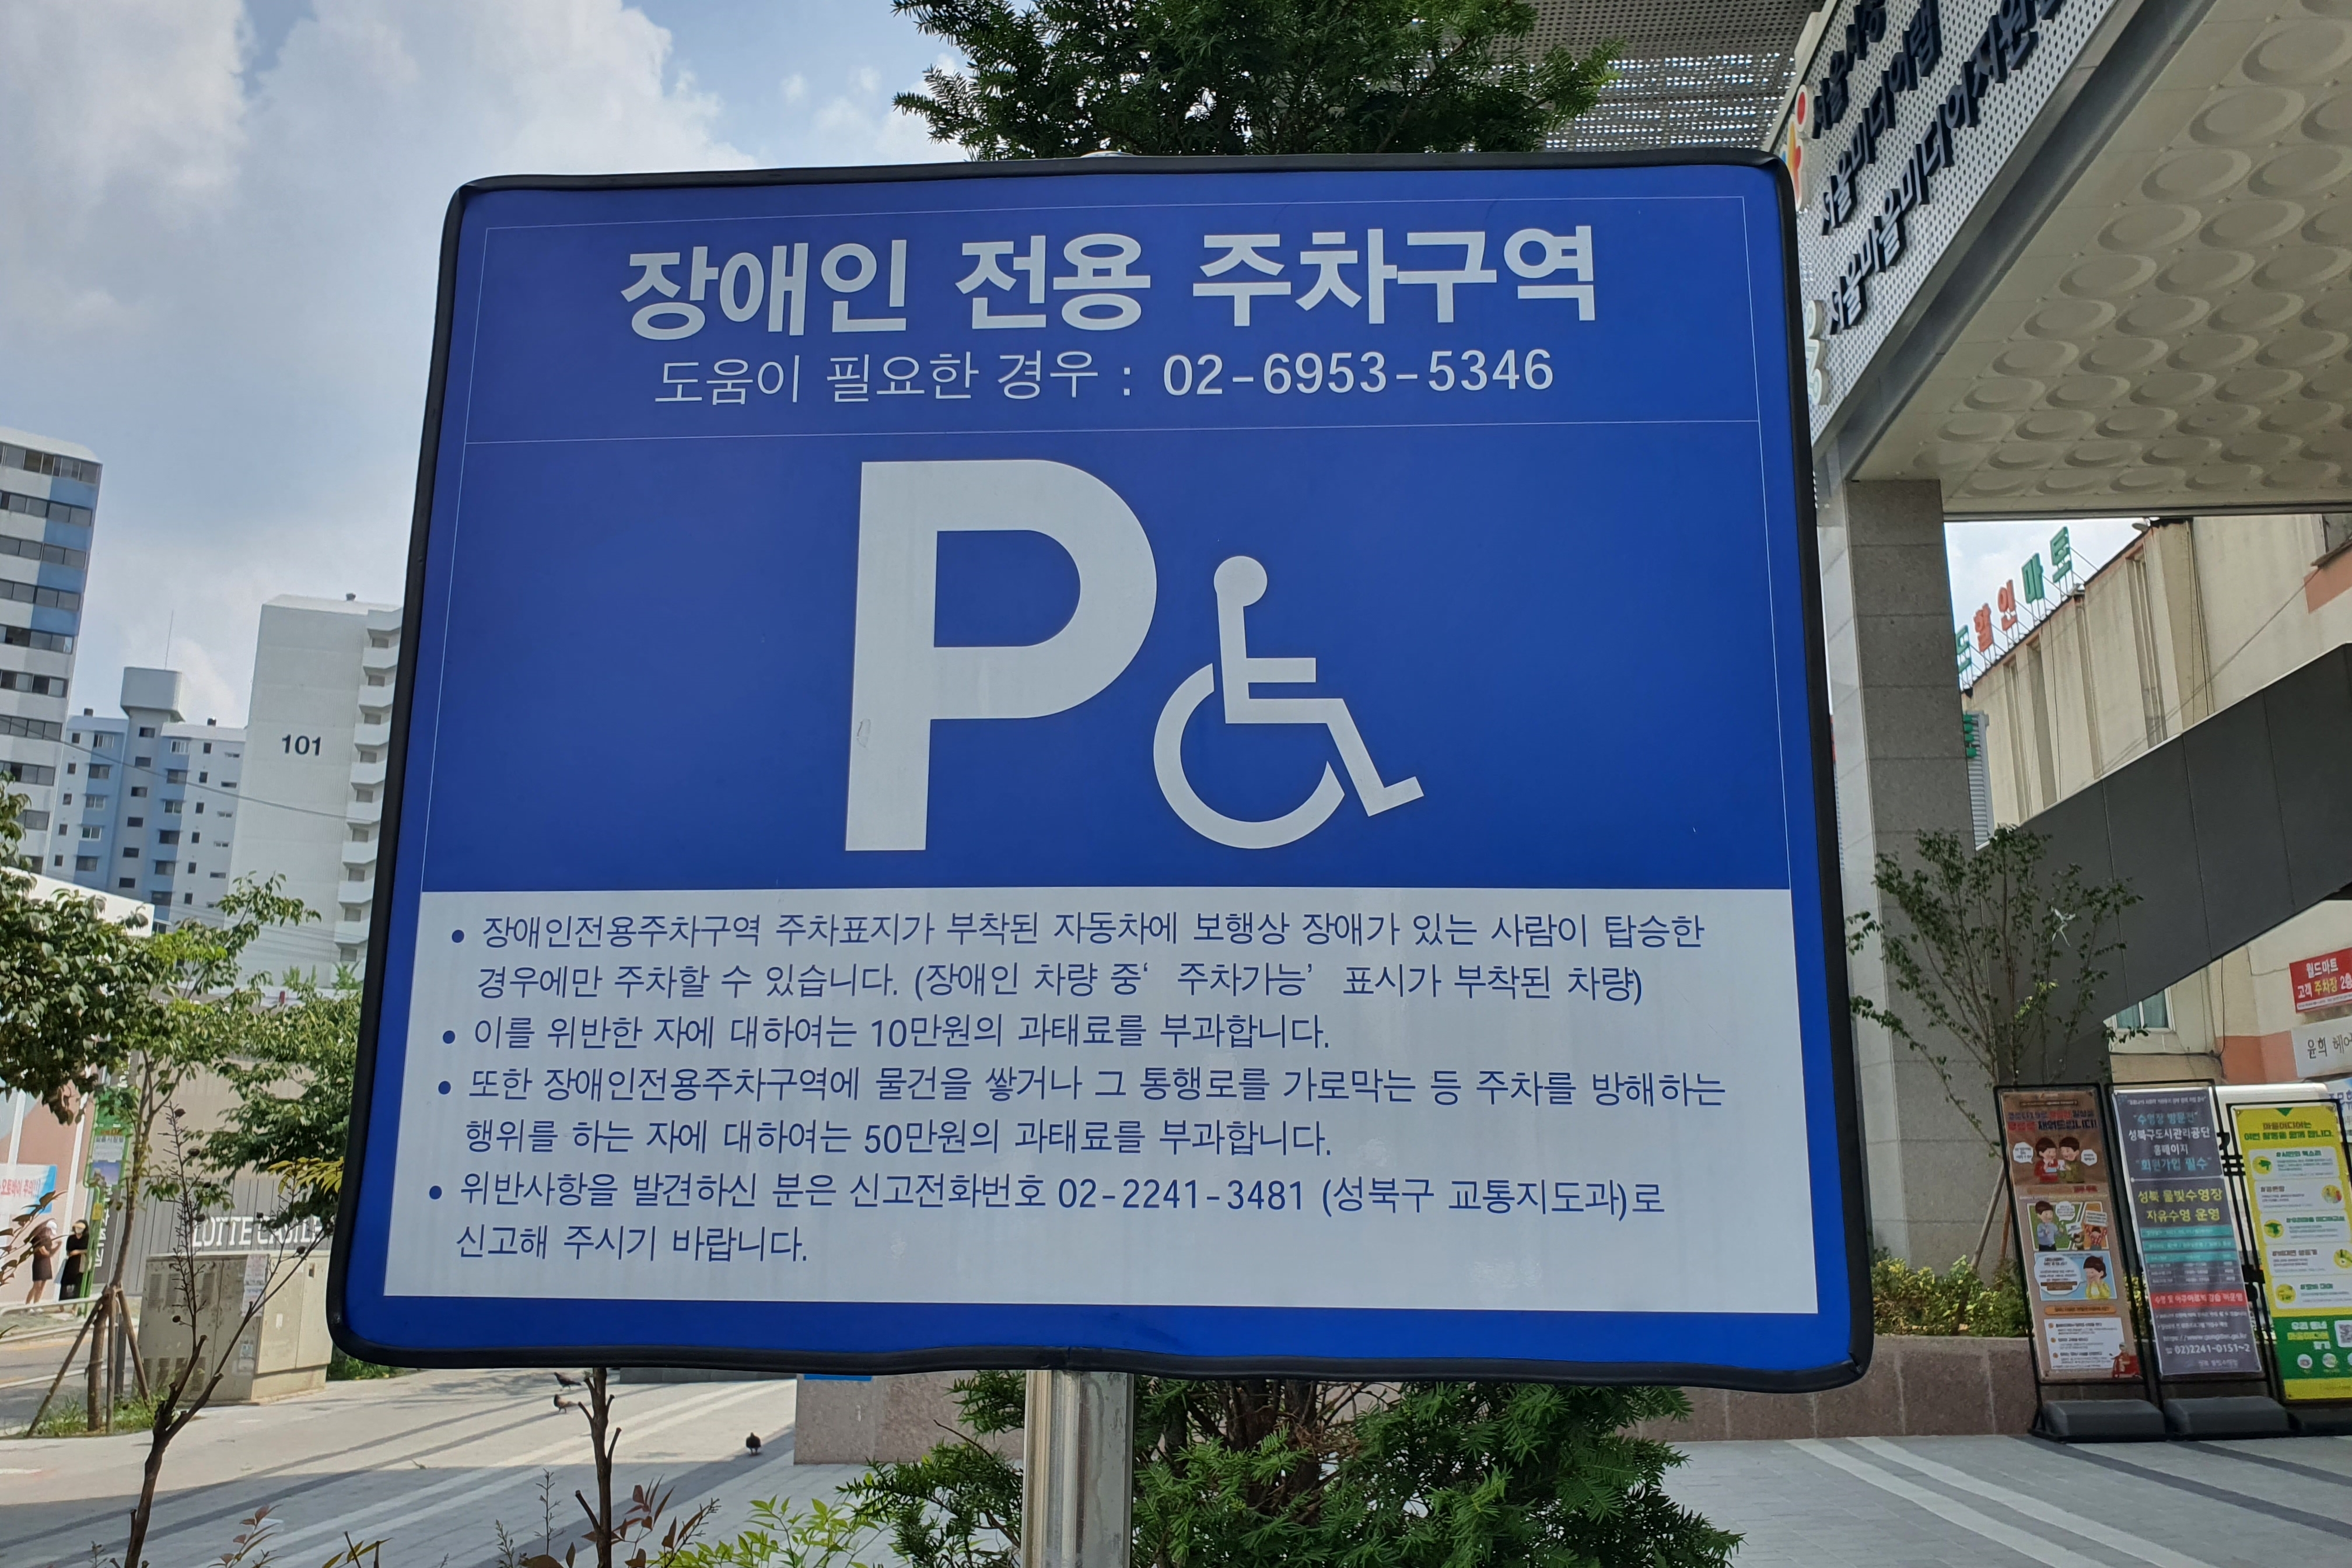 Lounge for families with children0 : Signboard on the accessible parking lots inside the parking space
